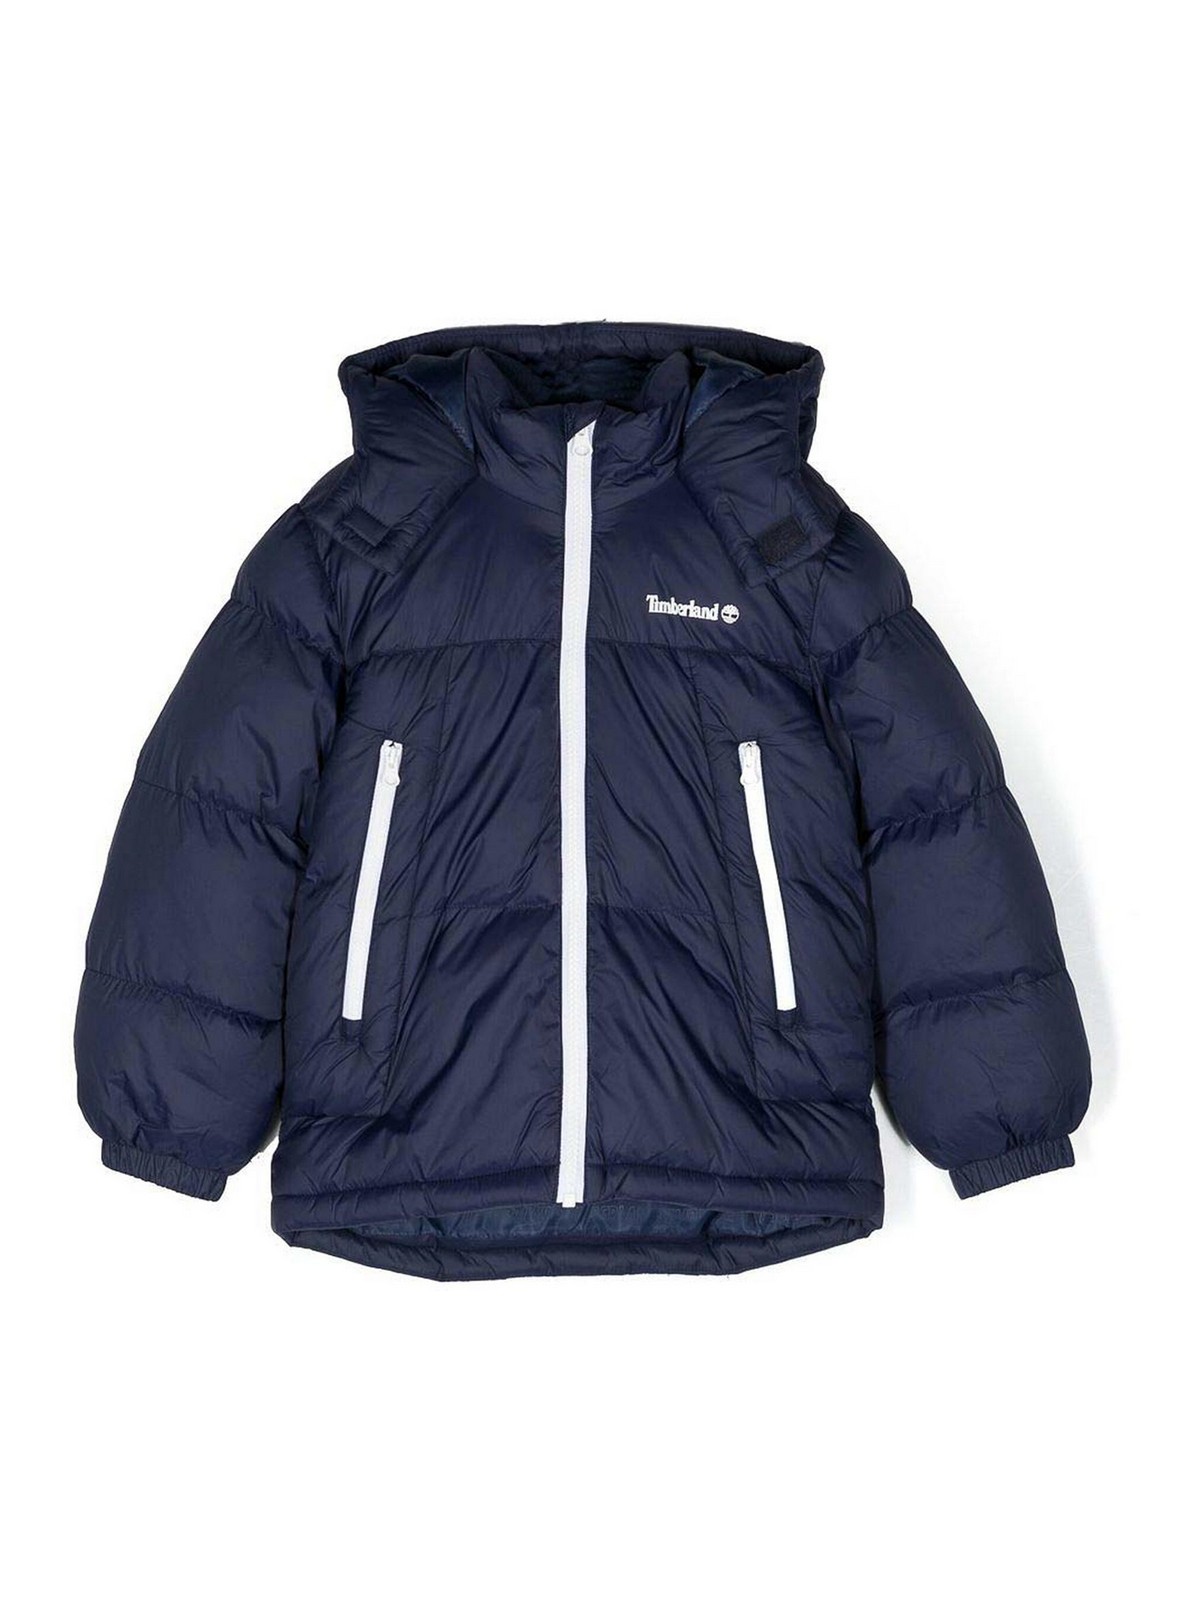 TIMBERLAND NAVY BLUE PADDED JACKET WITH HOOD